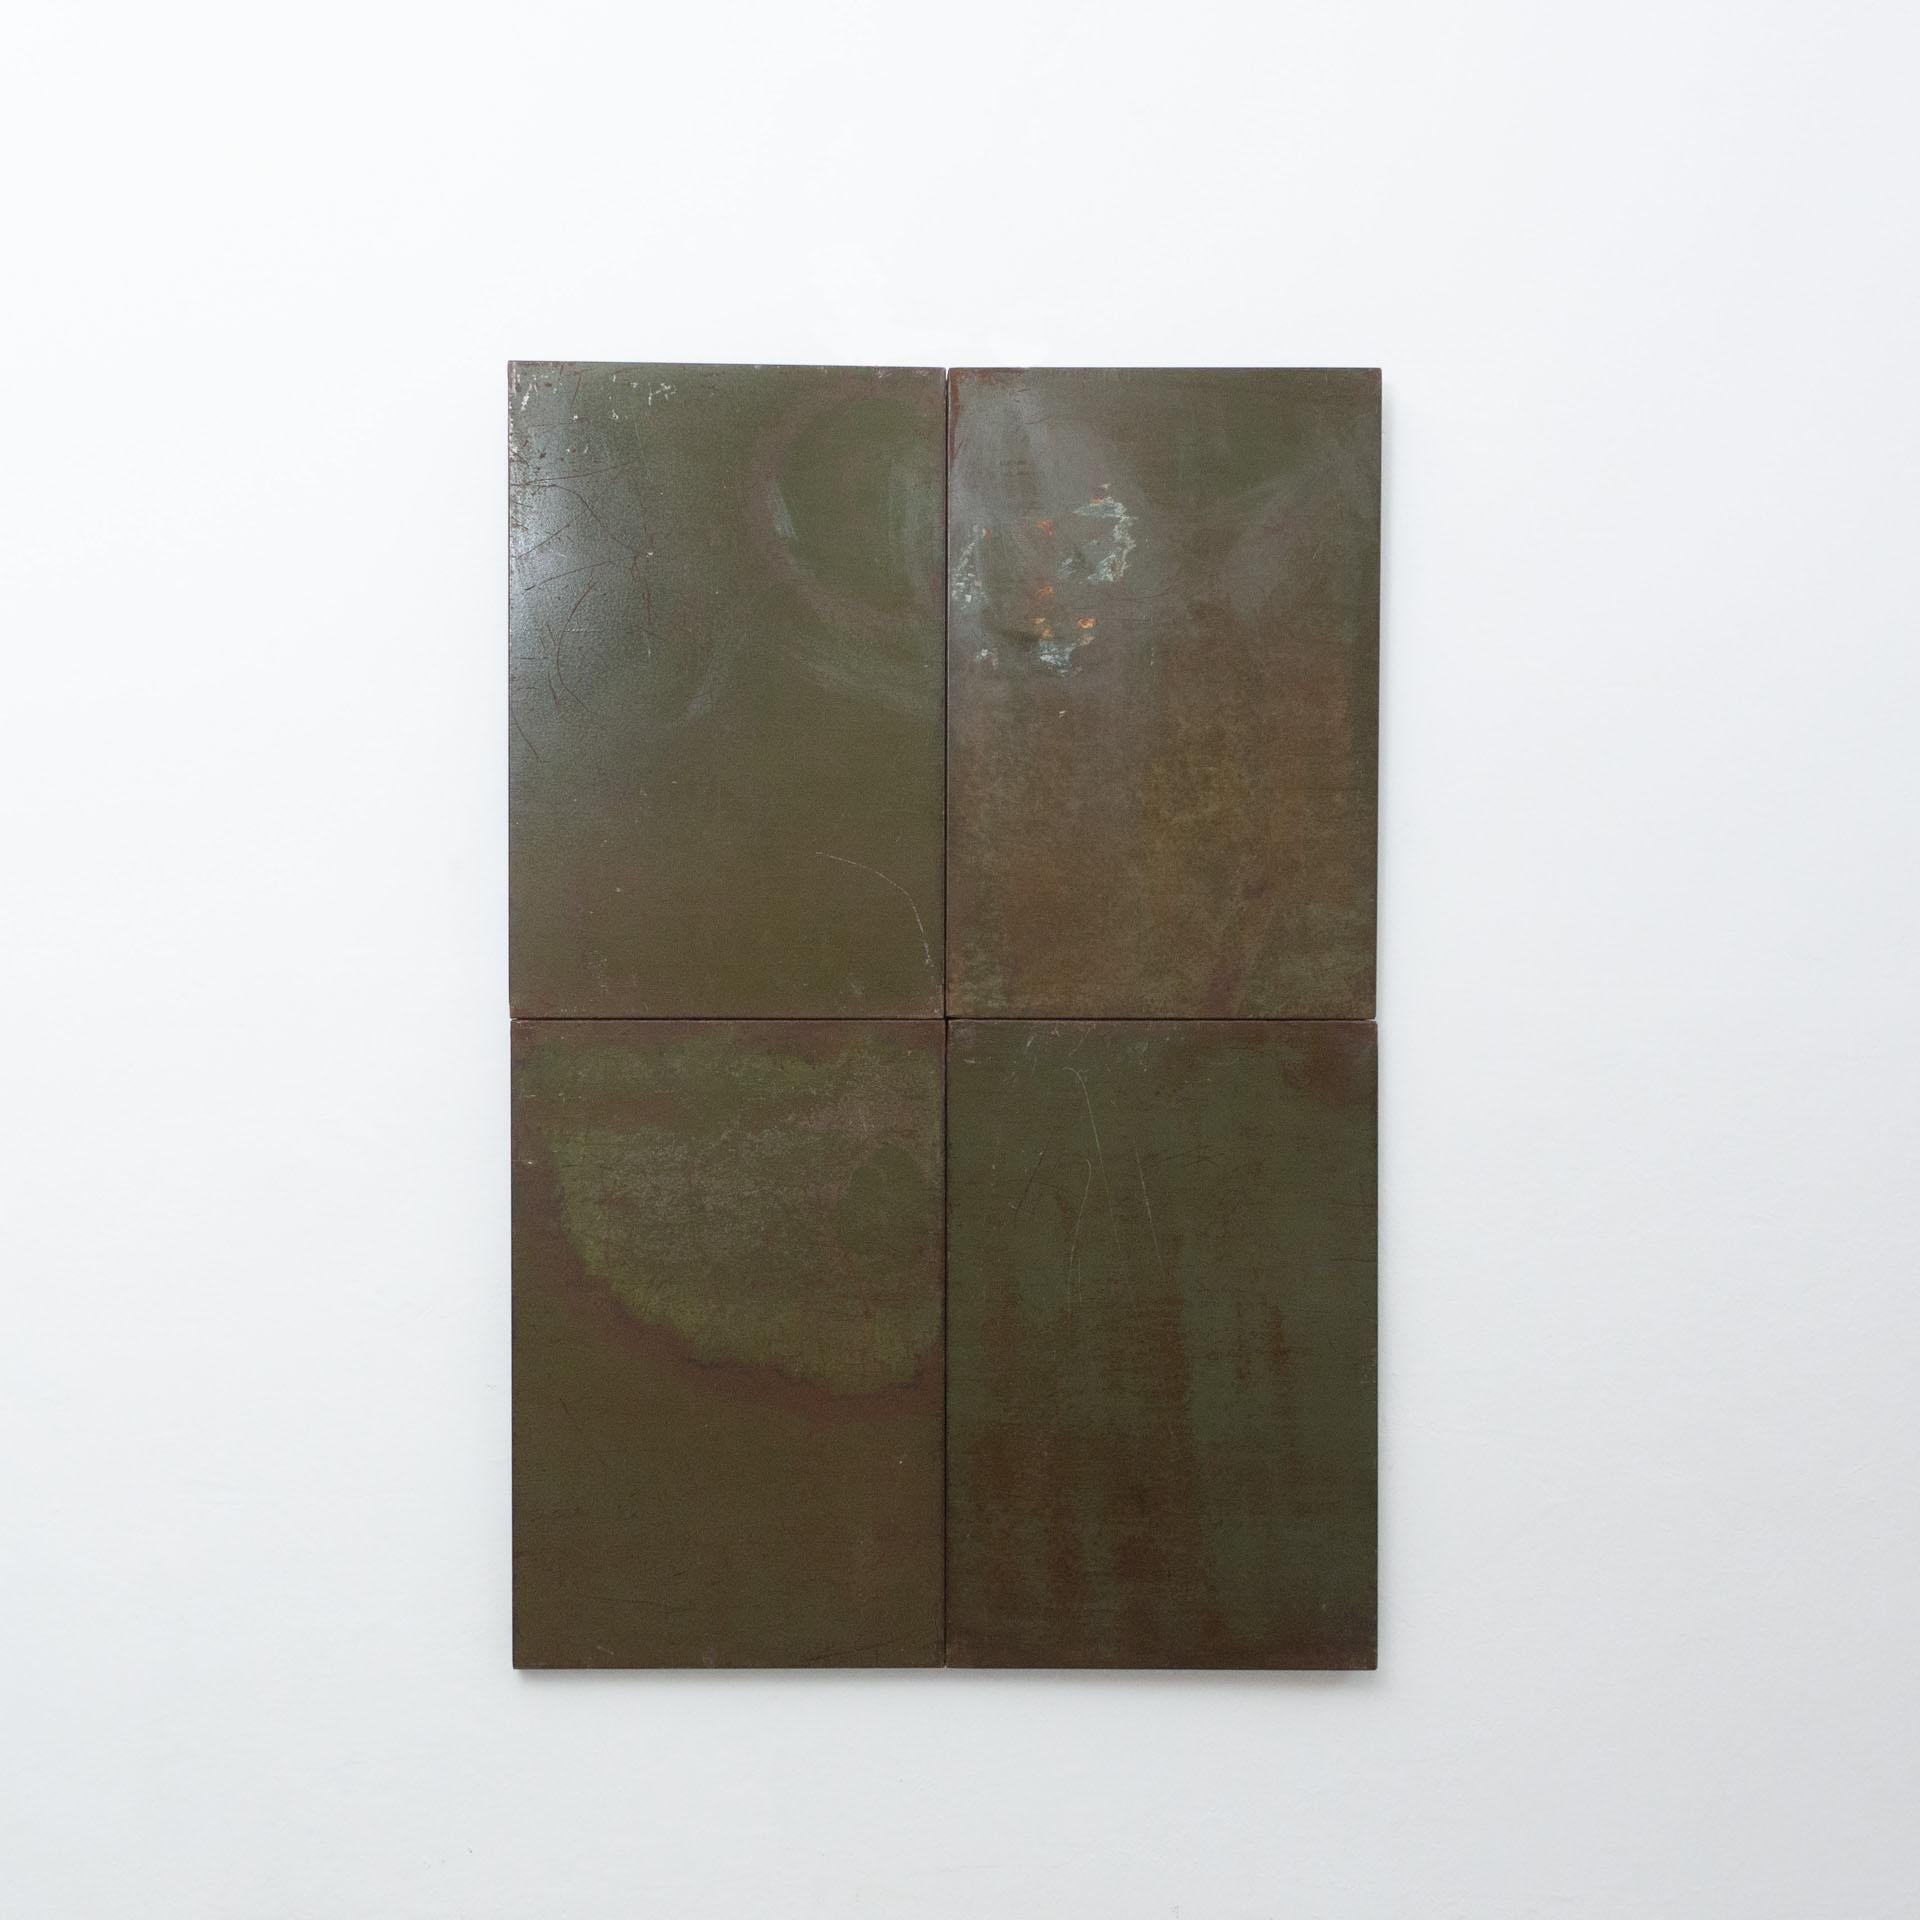 Ramon Horts, Minimalist artwork.

Structures of metal compositions made in Barcelona, circa 2019. 

In original condition.

Scraped metal, rusted and varnished.